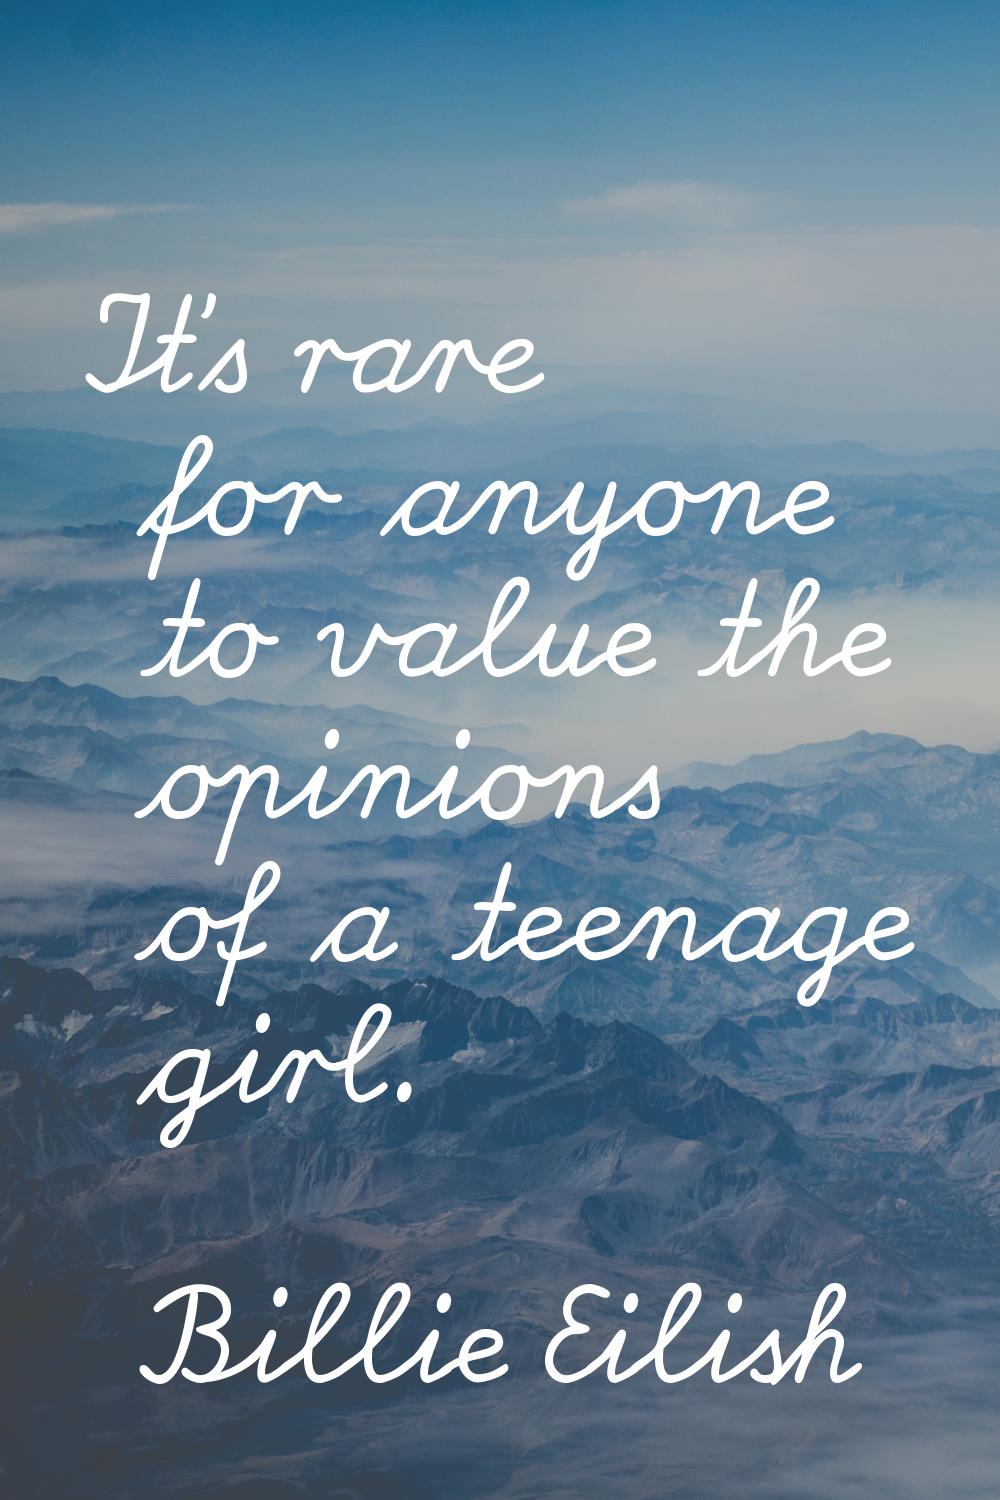 It's rare for anyone to value the opinions of a teenage girl.